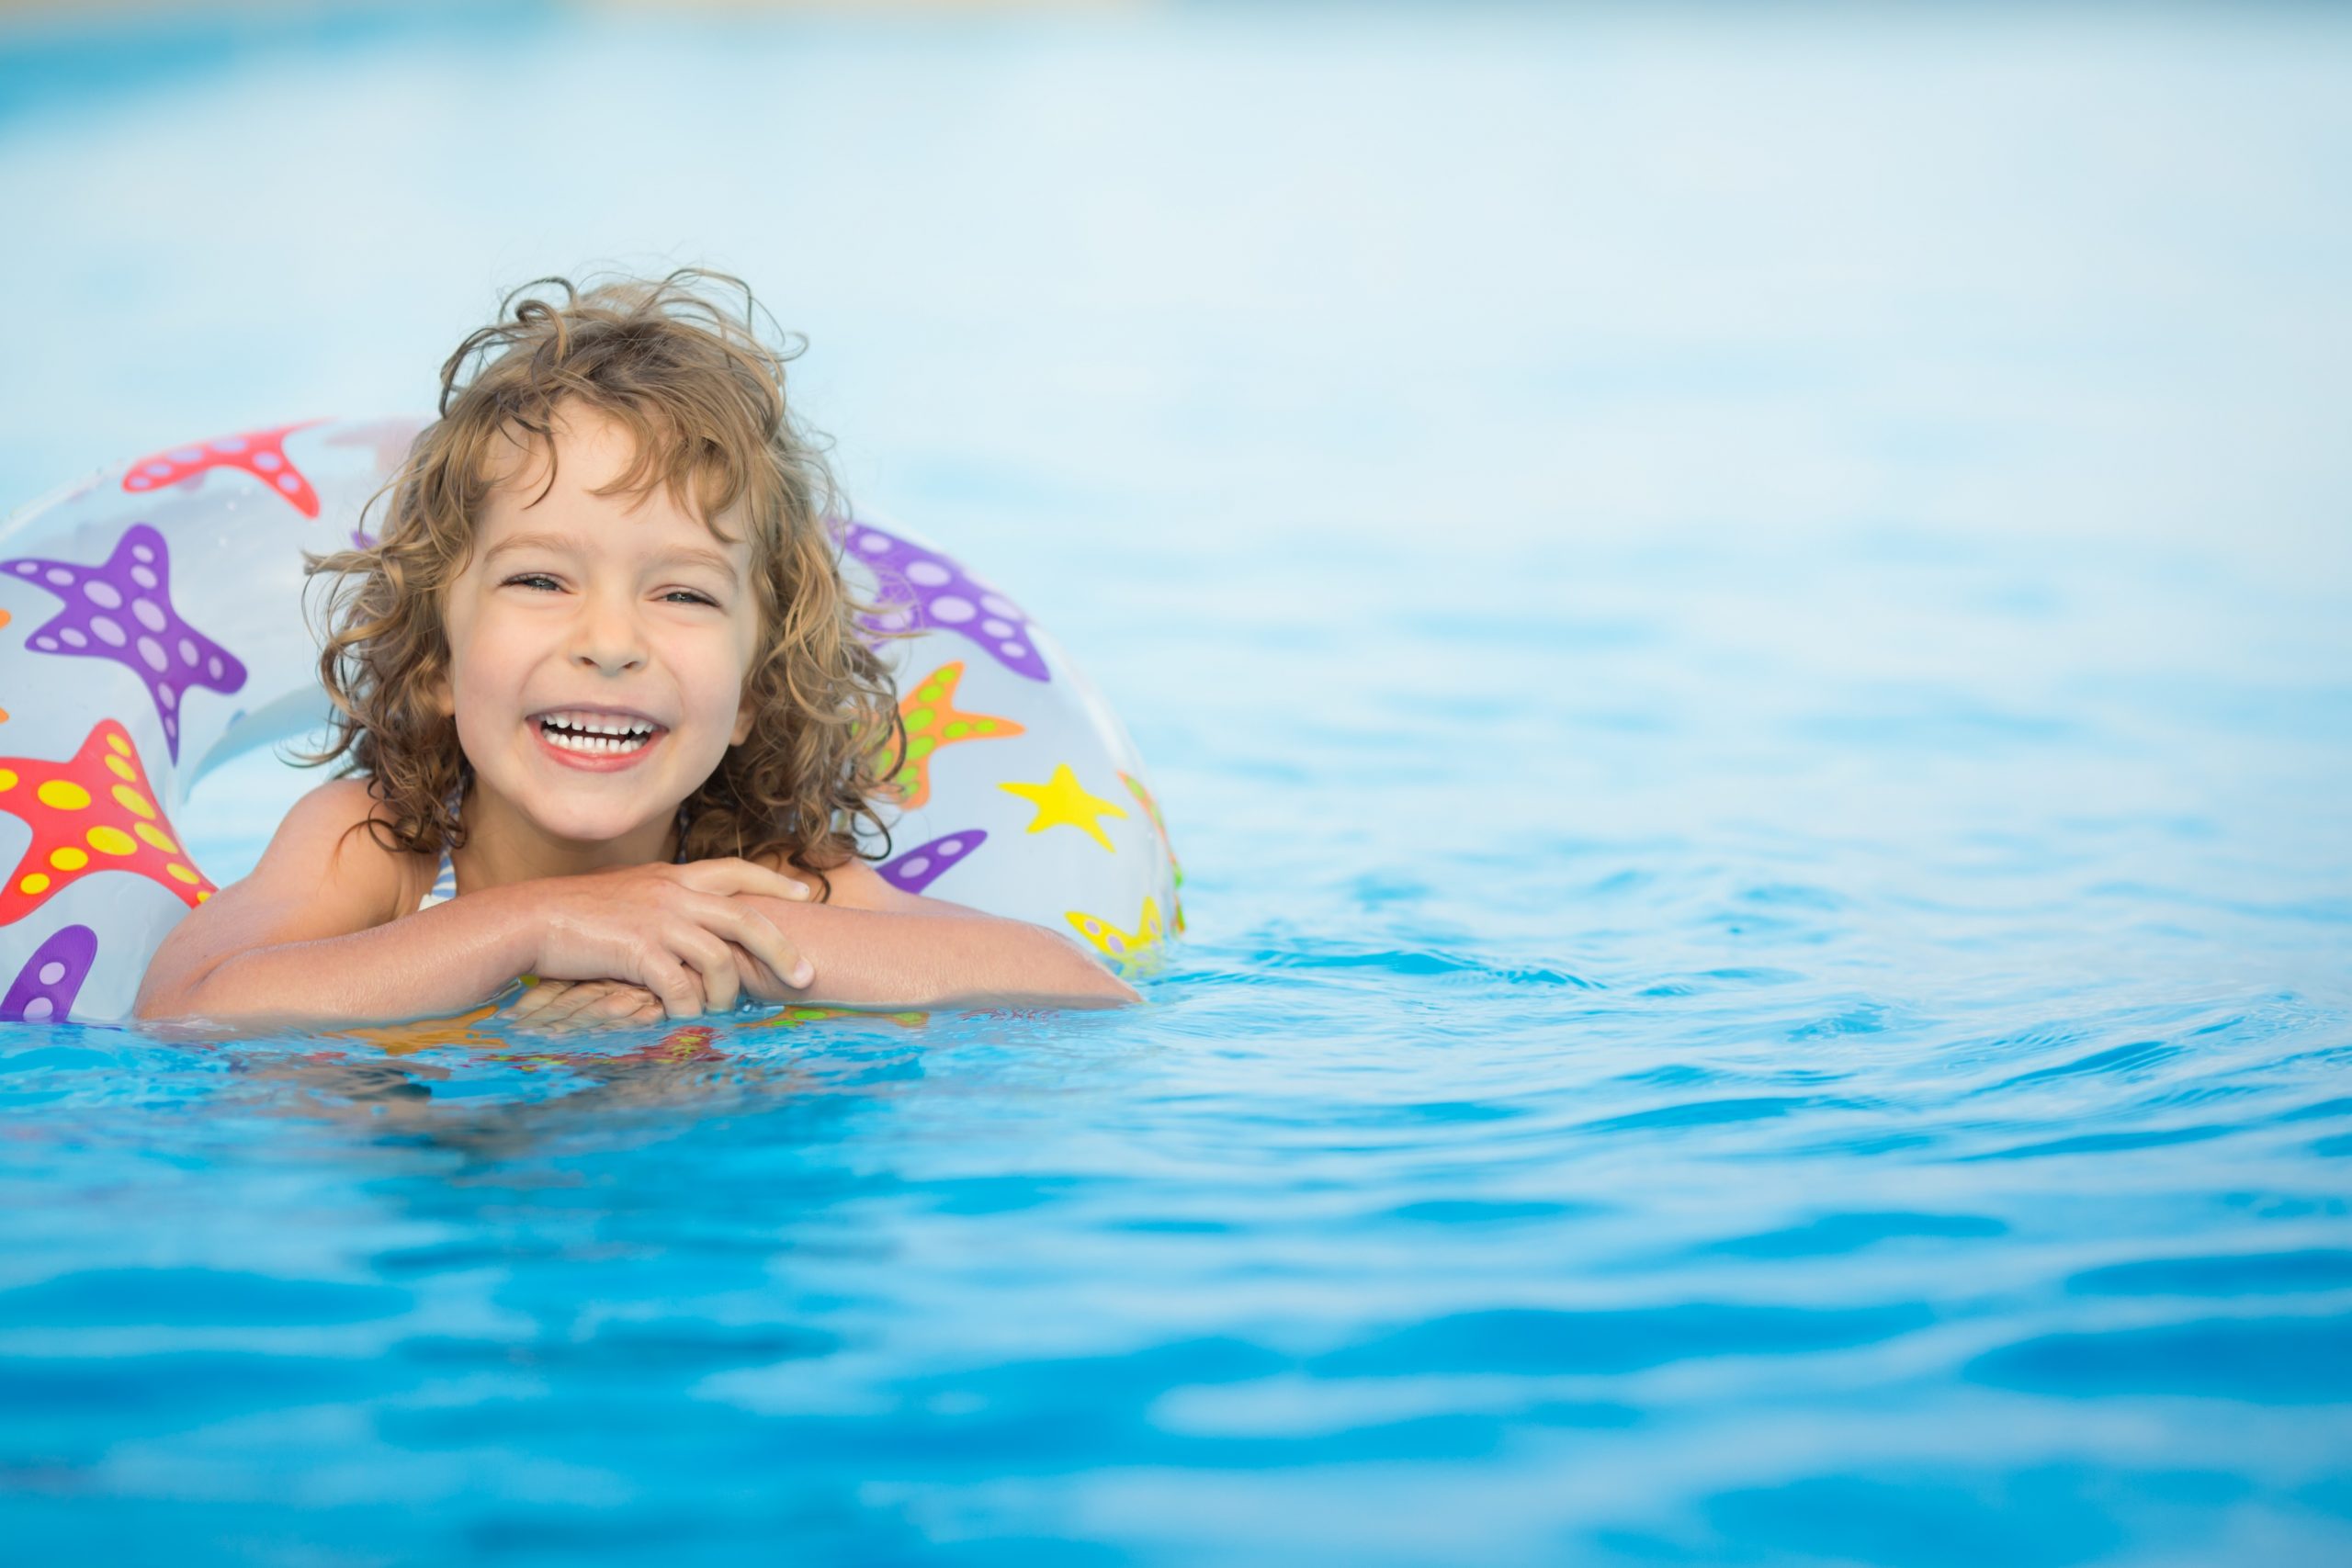 What You Should Consider Before You Install Your Pool Slide?